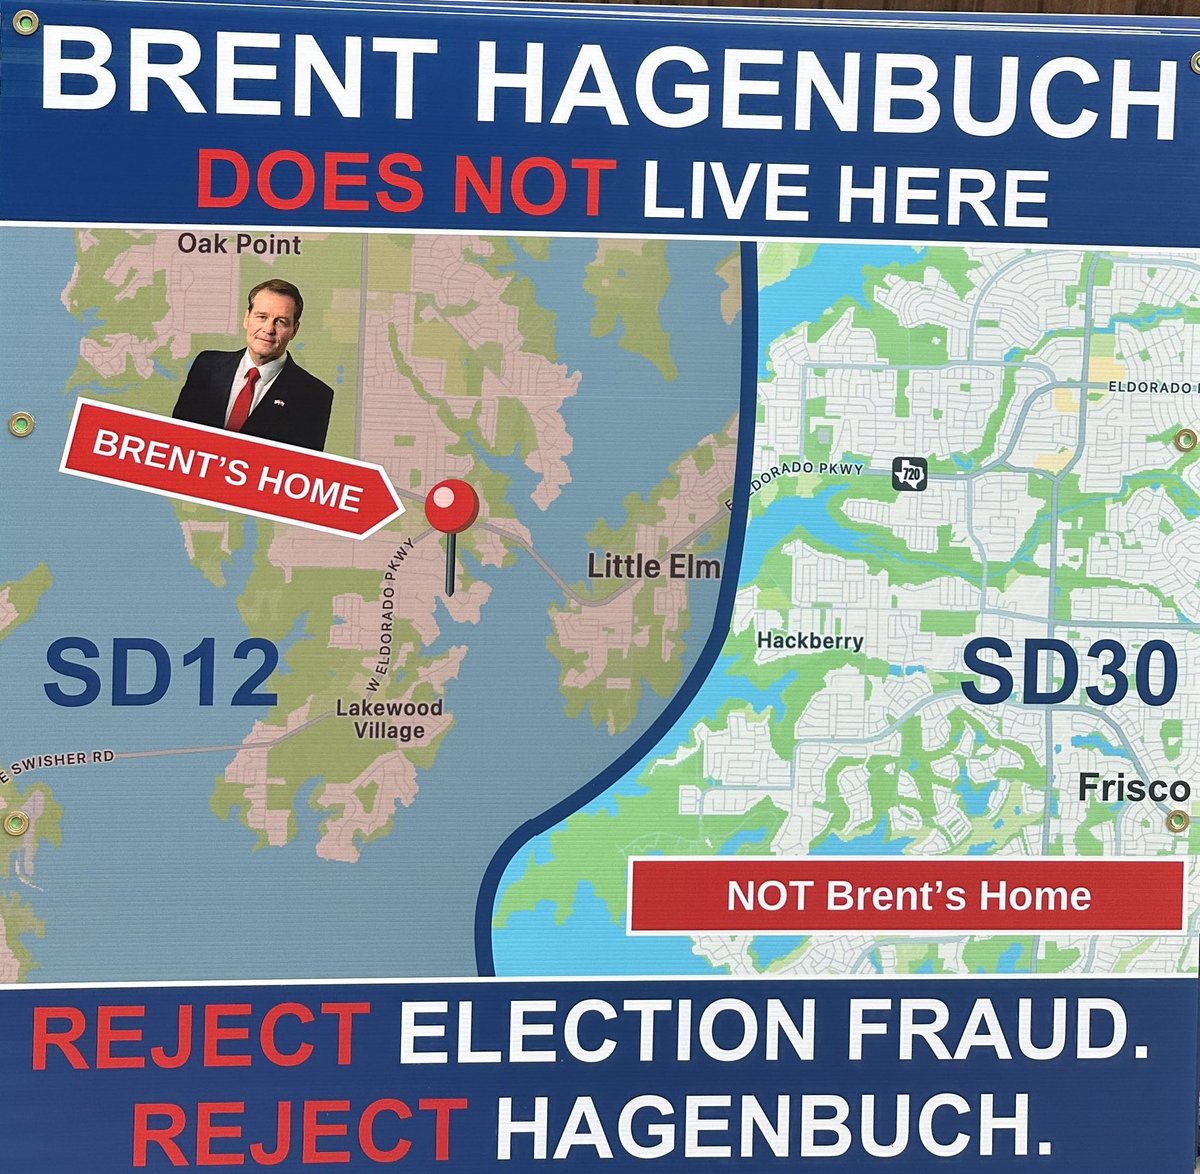 PAGING Brent Hagenbuch. Paging @HagenbuchTX who really lives in #SD12 but SAYS 😉 😉he lives in #SD30 and is in the runoff.